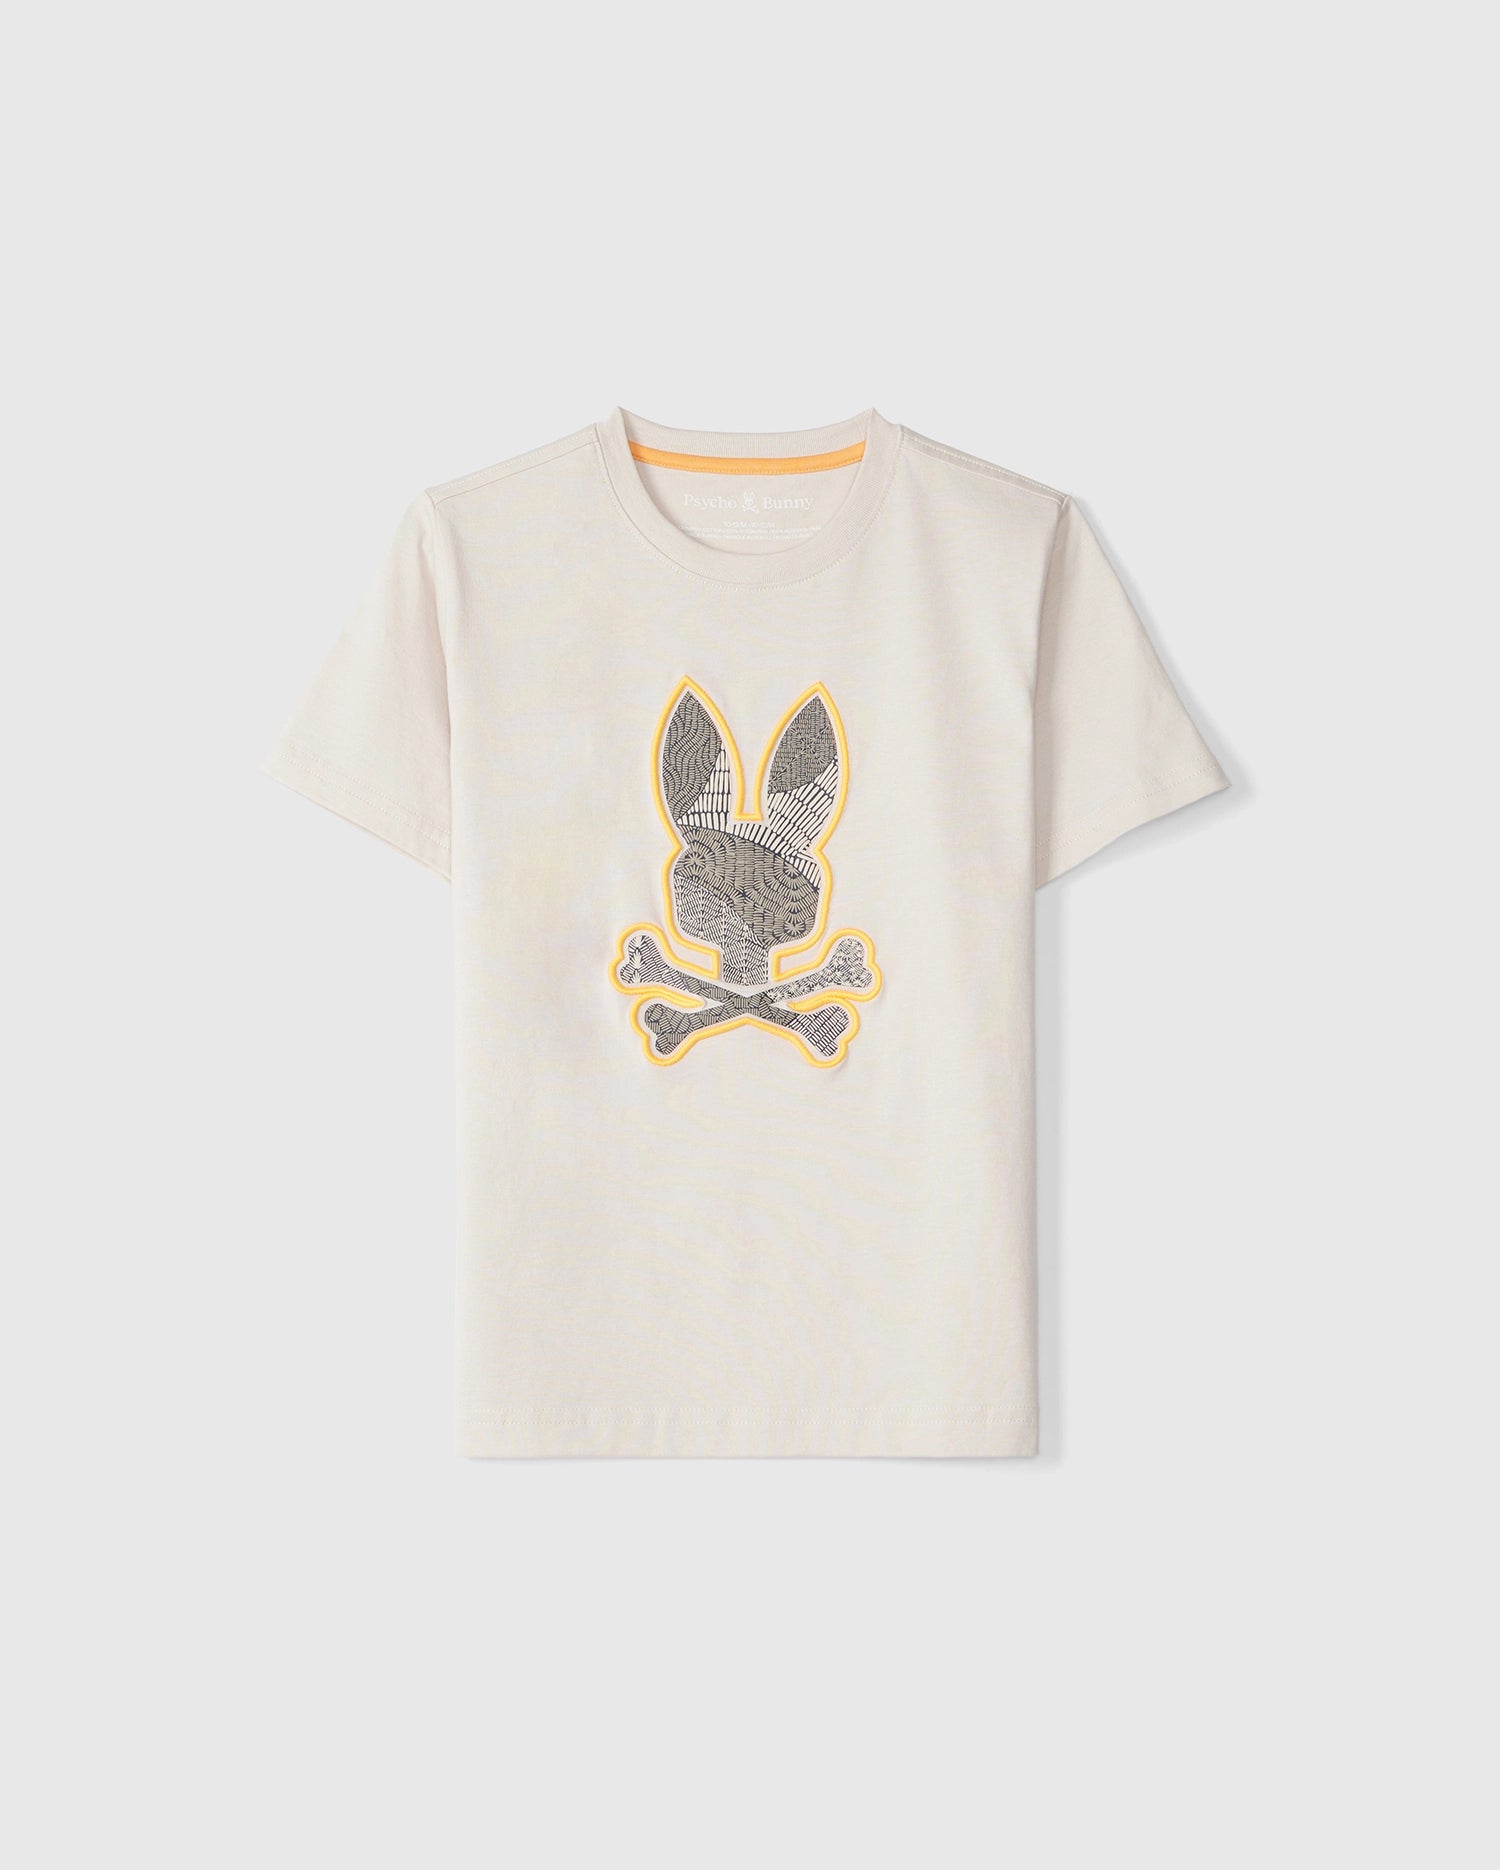 A beige short-sleeved KIDS LENOX EMBROIDERED GRAPHIC TEE - B0U405B200 by Psycho Bunny featuring a design of a bunny head with crossbones below it in the center. The intricate embroidery is in black with a yellow outline, perfect for adding a touch of spring style. The shirt is displayed against a white background.